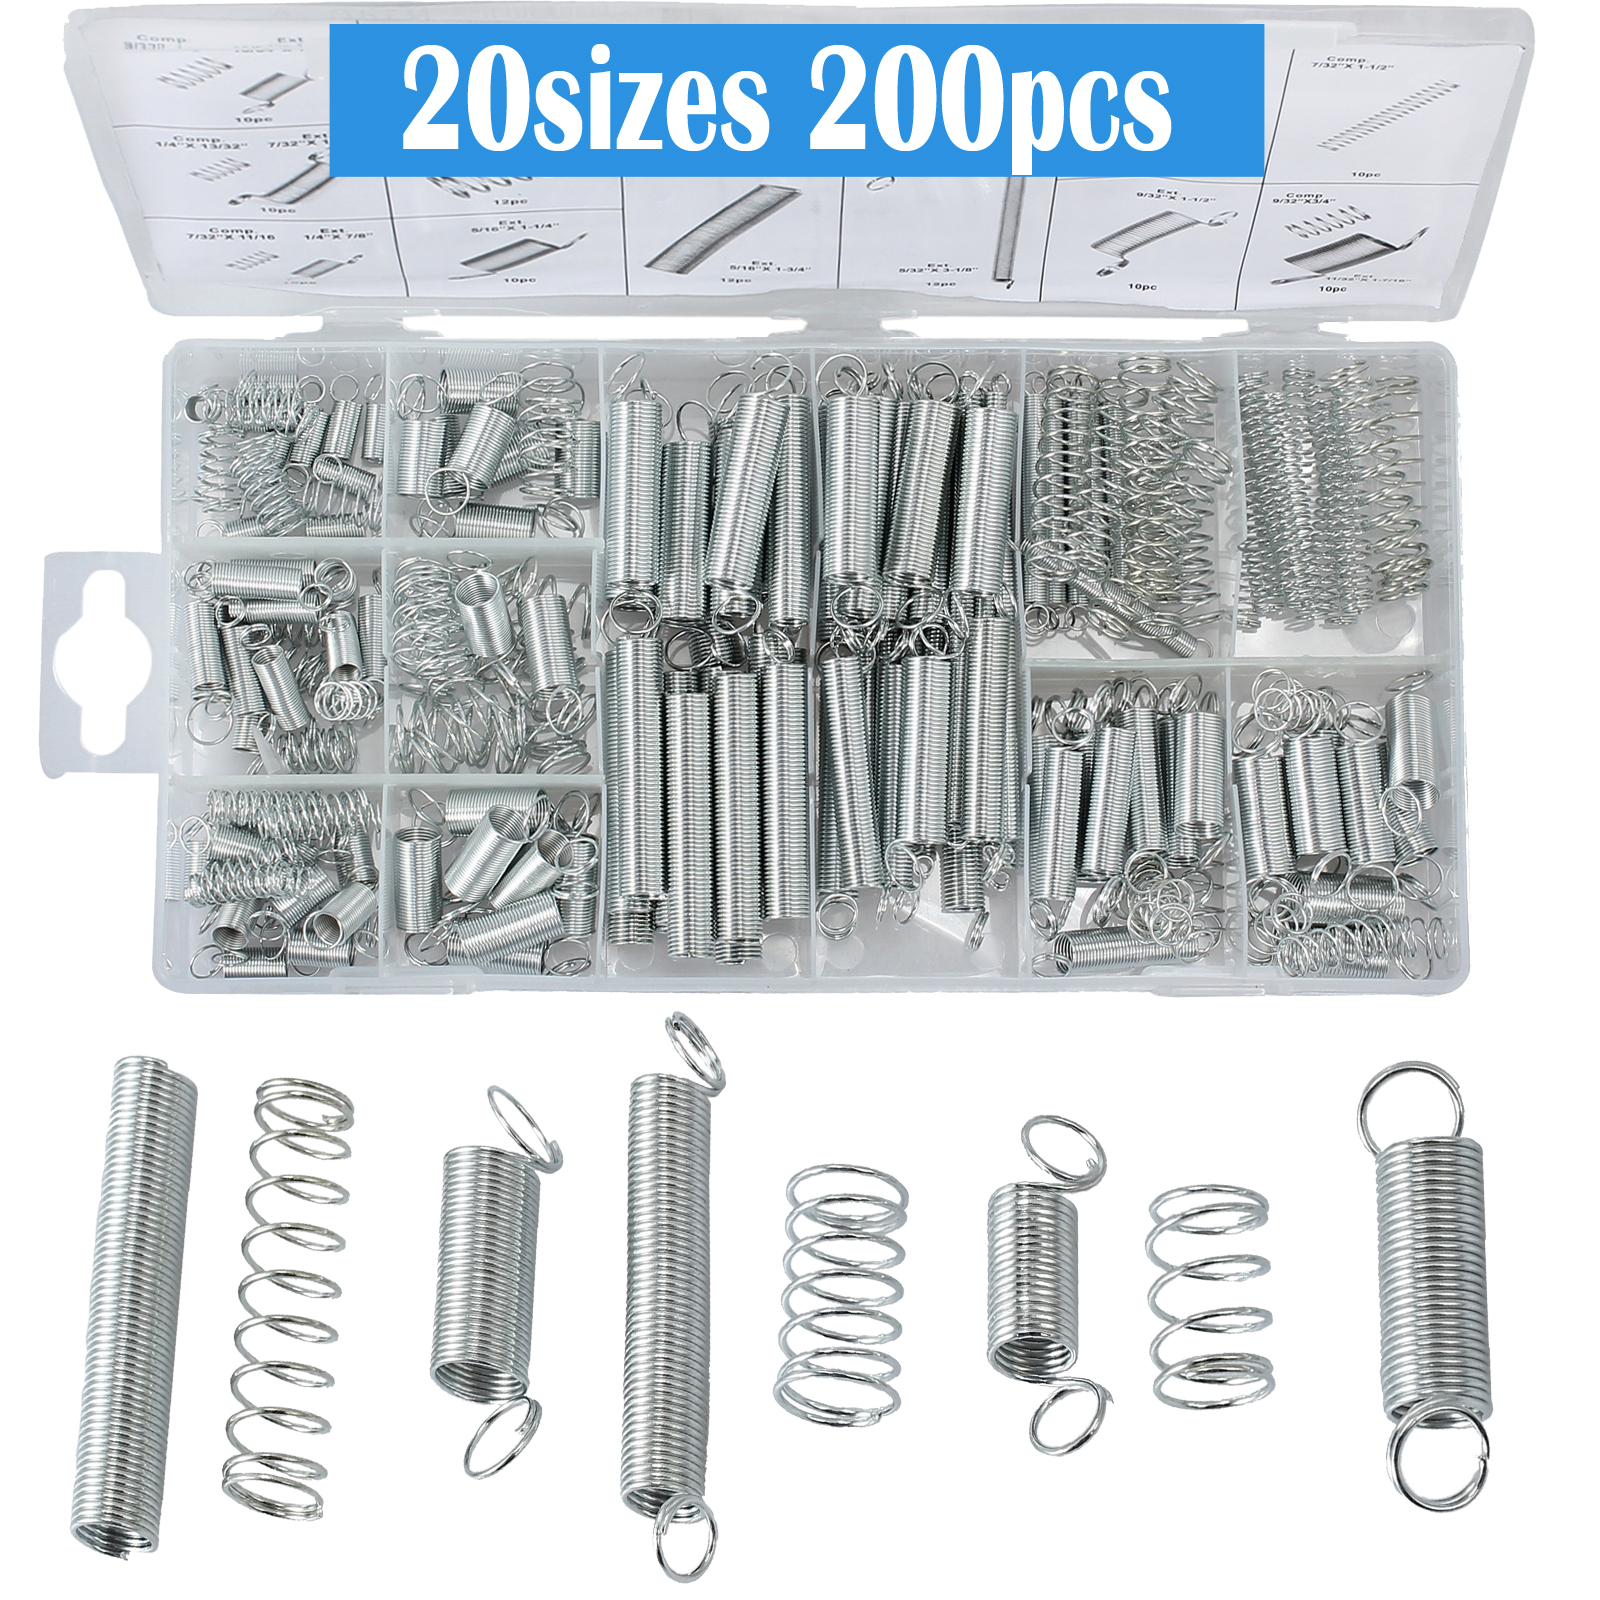 20sizes Assorted Extension Spring Assortment Compression Metal Steel Kit 200pcs 753807580816 Ebay 